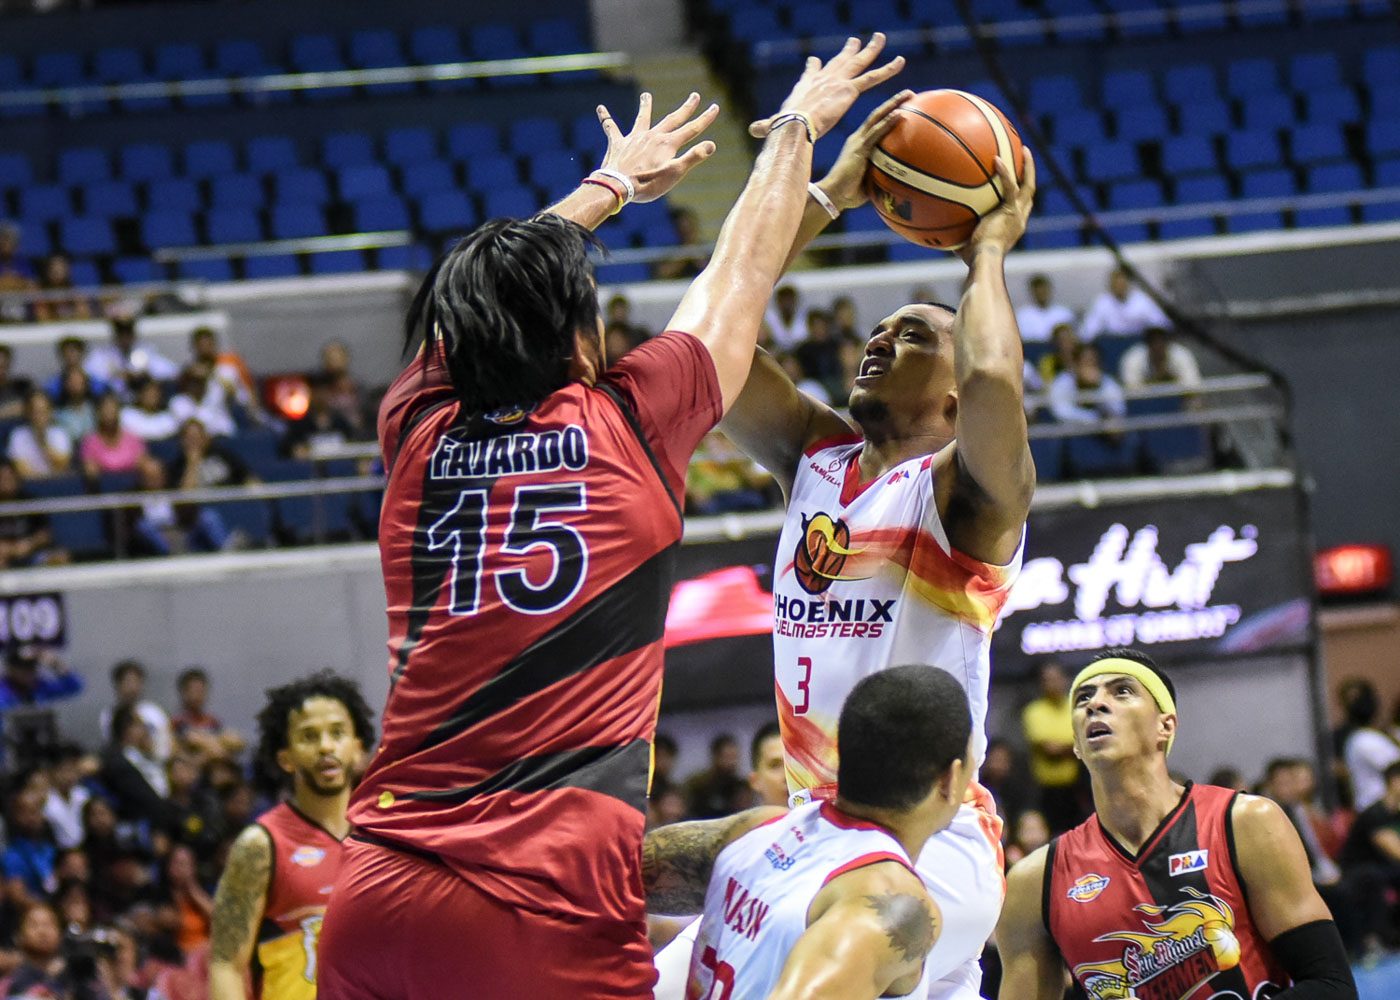 Jason Perkins not satisfied with PBA debut despite near double-double